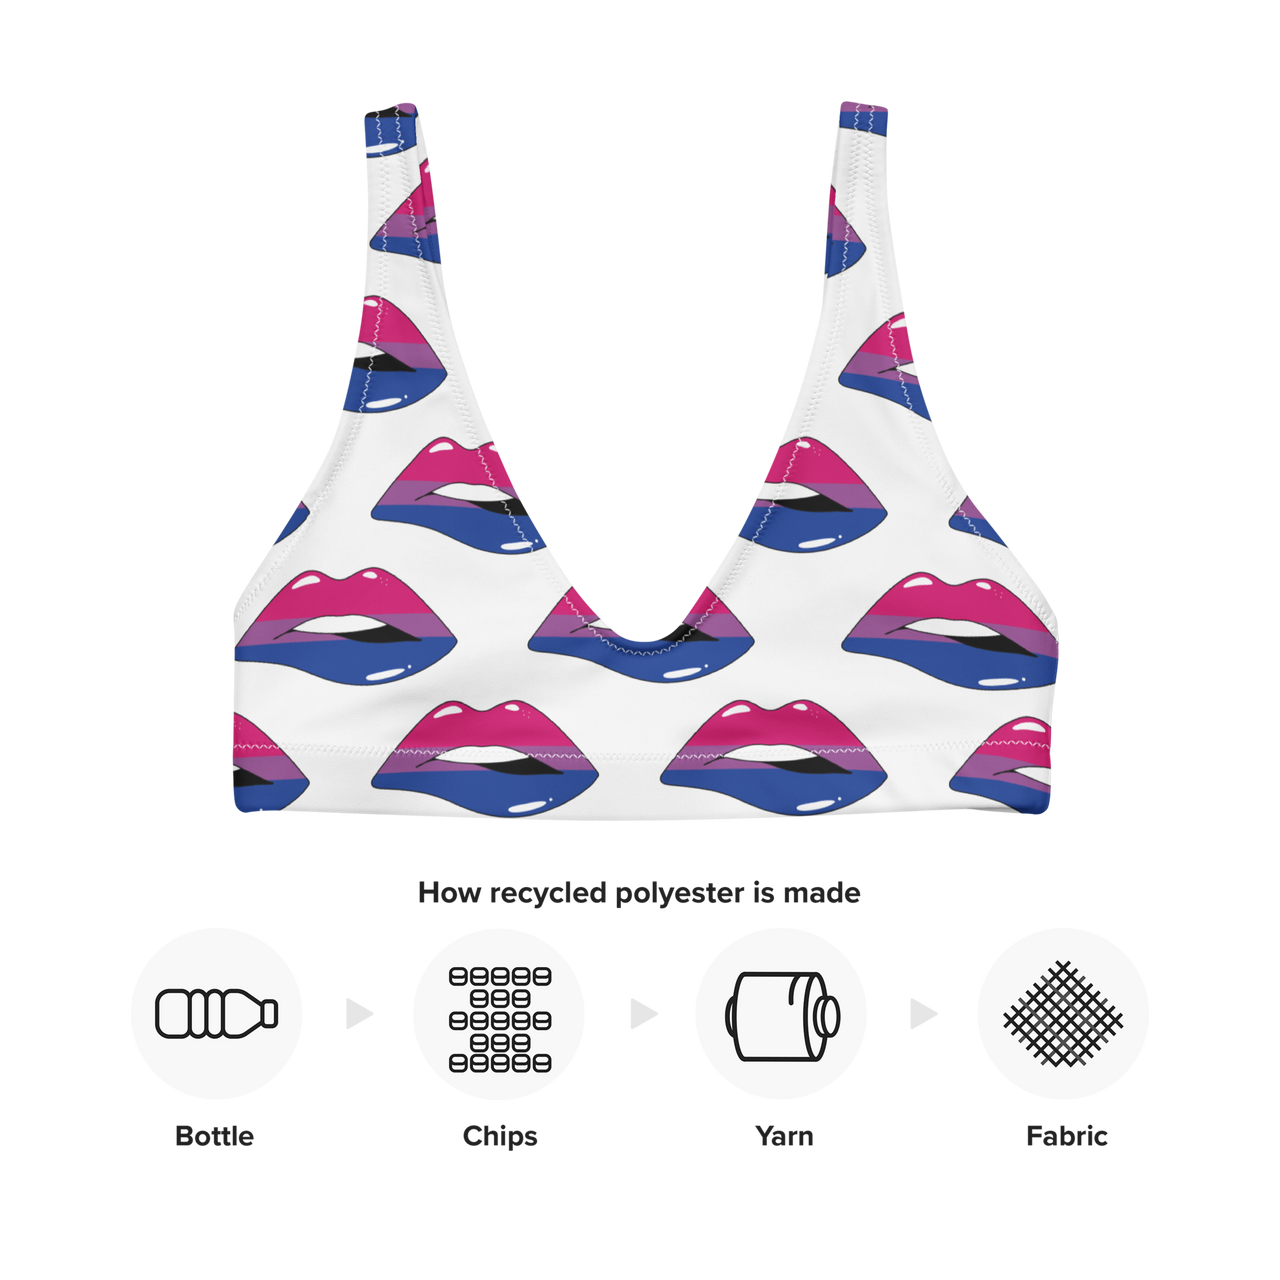 Bisexual Flag Kisses Padded Bikini Top for They/Them Him/Her - White SHAVA